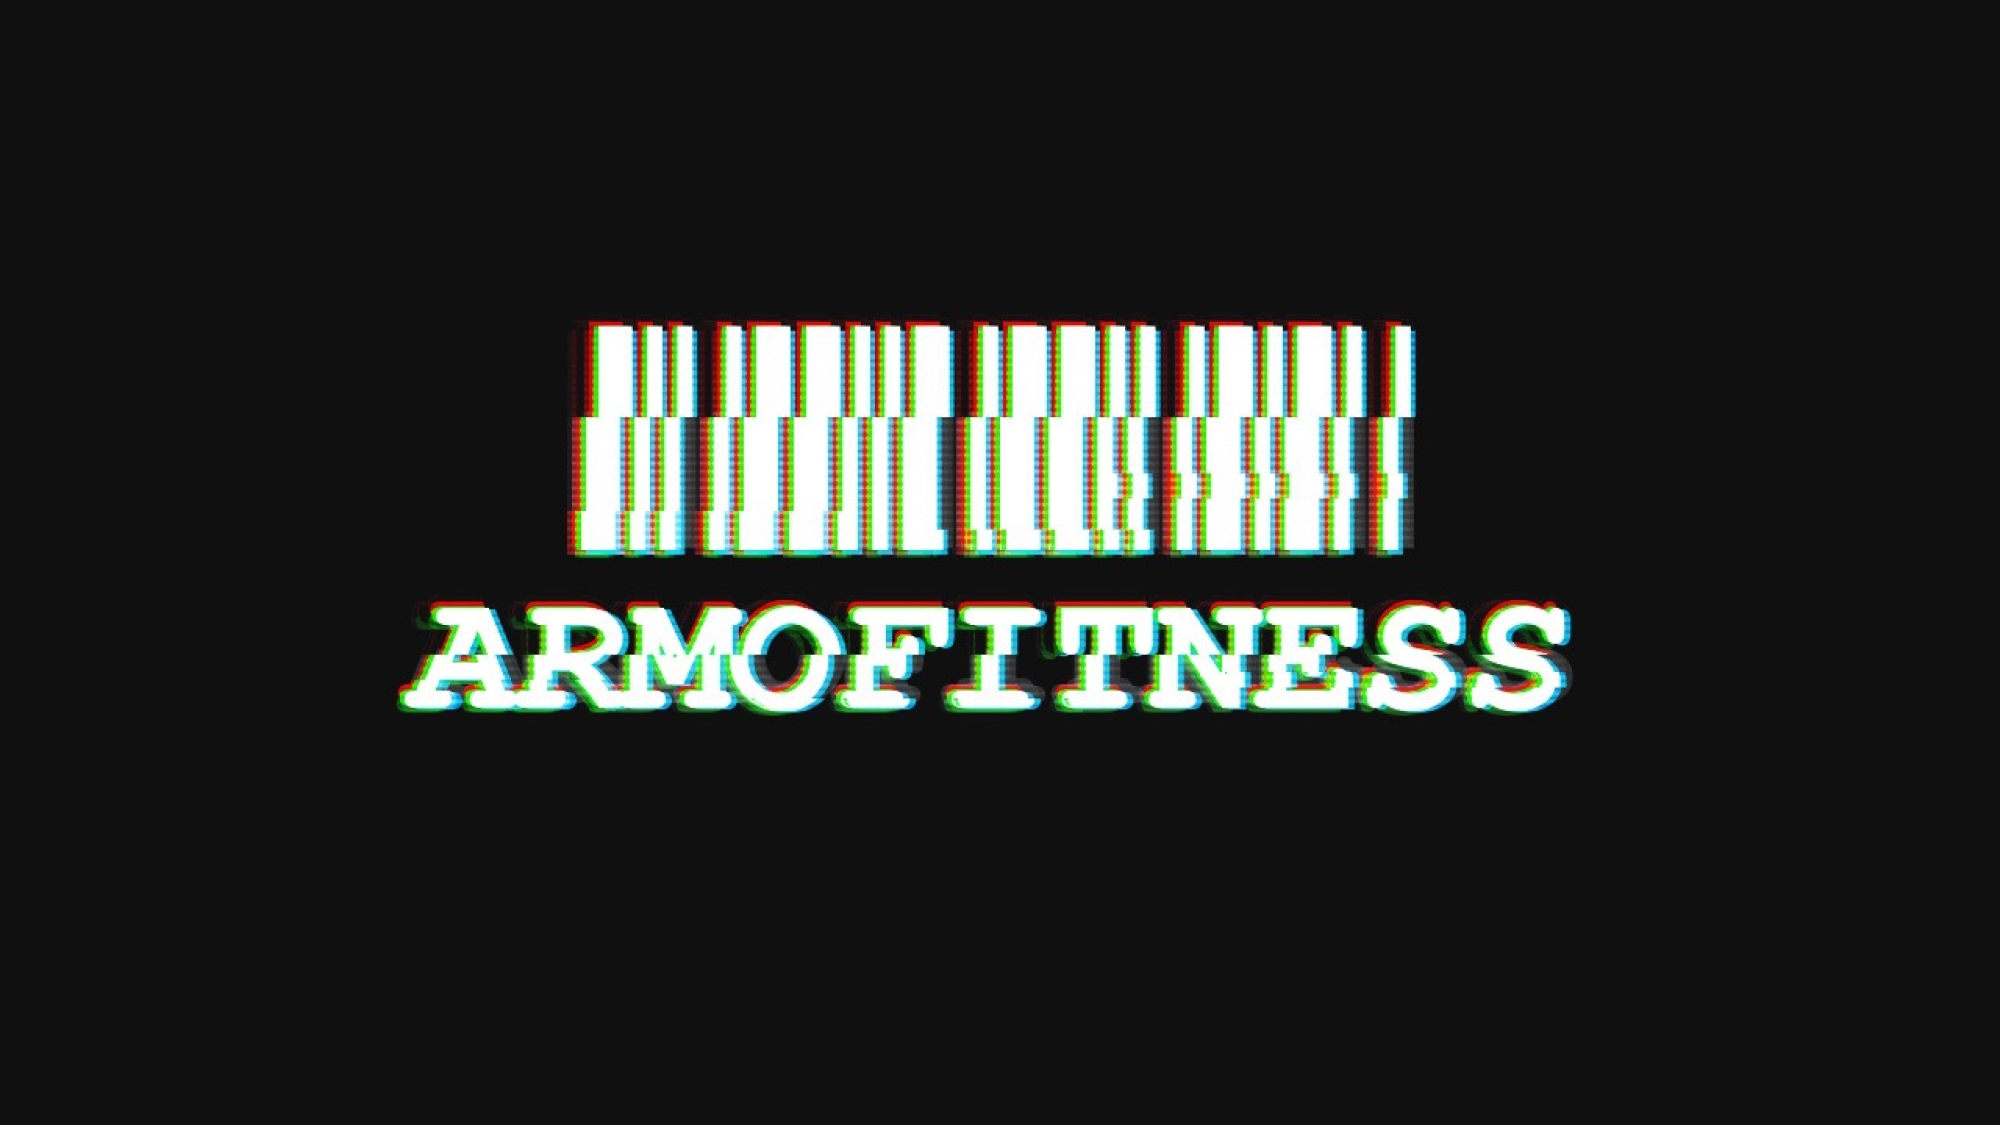 Logo for Armofitness with barcode